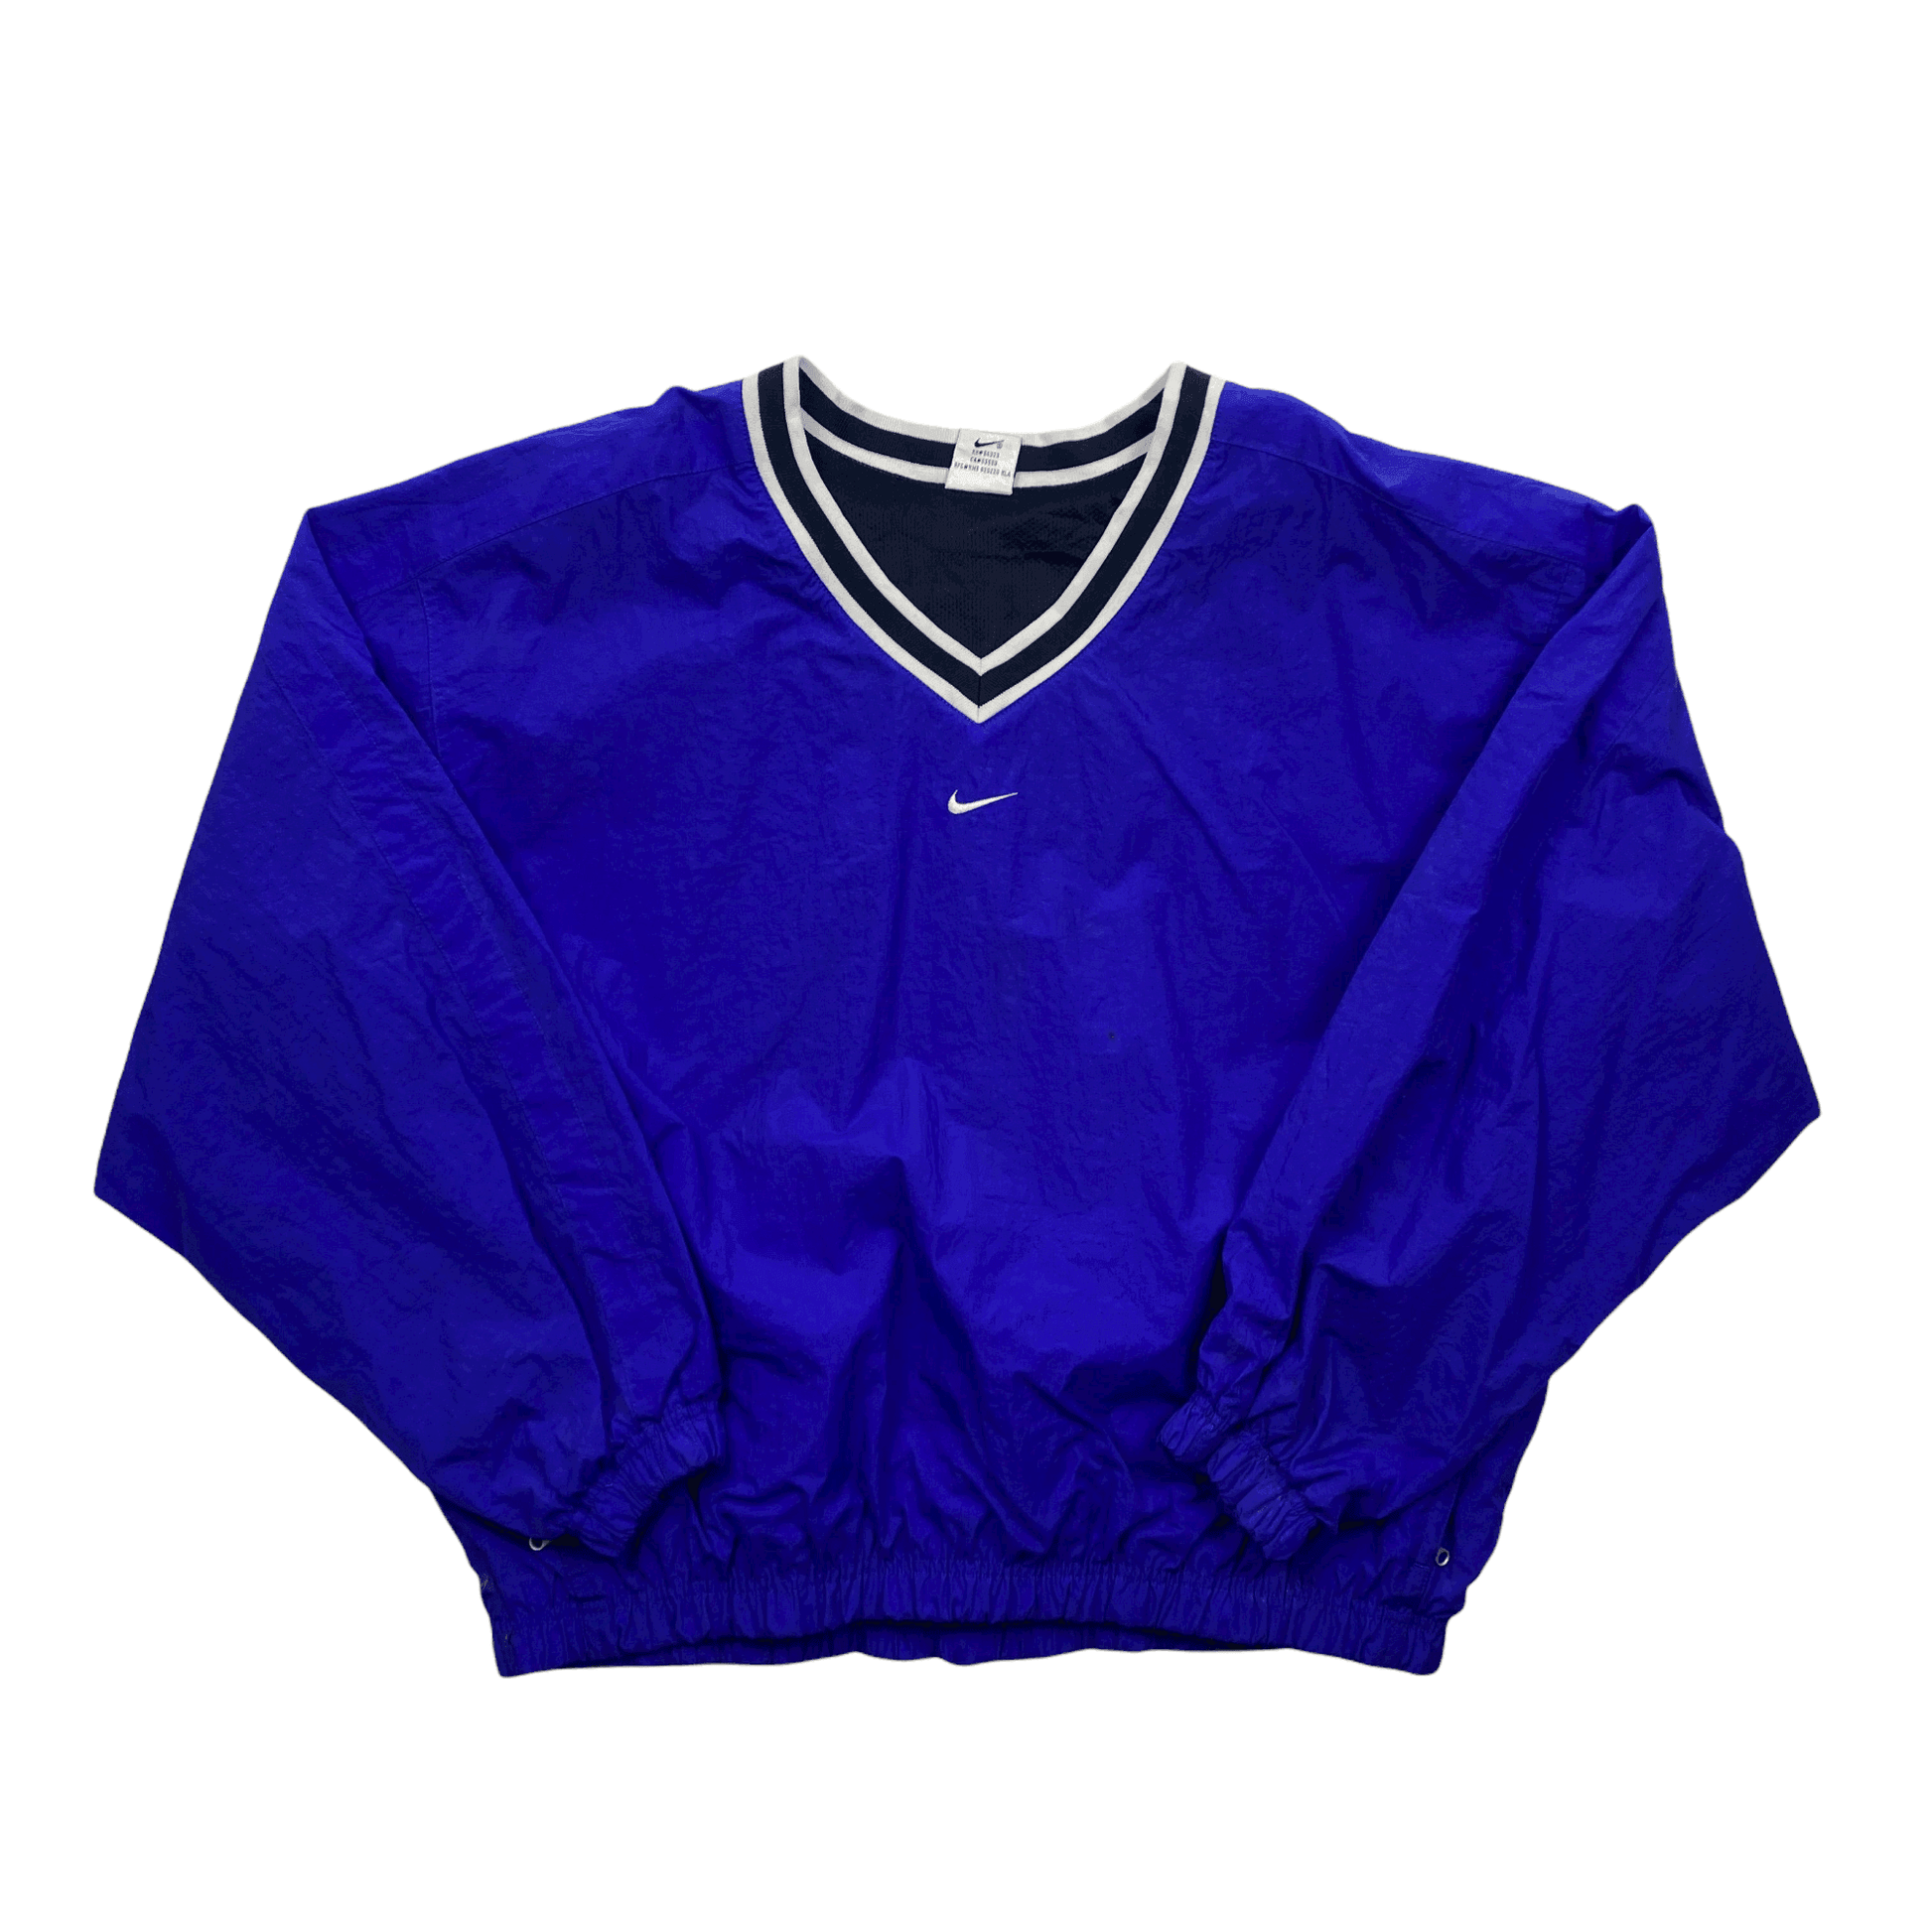 Vintage 90s Blue Nike Waterproof Centre Logo Training Top - Recommended Size - Medium - The Streetwear Studio